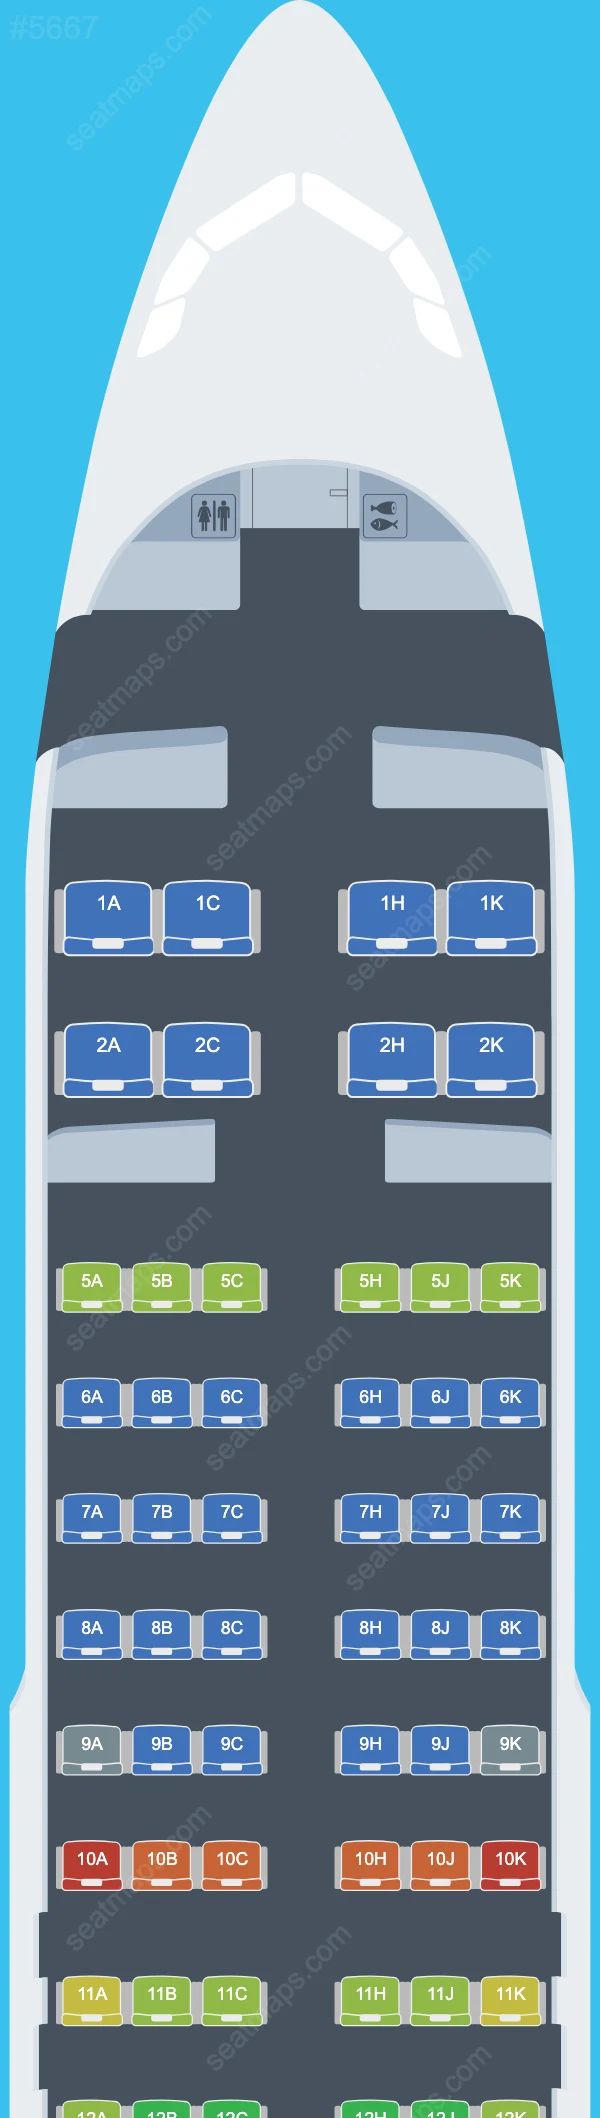 ANA (All Nippon Airways) Airbus A320 Seat Maps A320-200neo